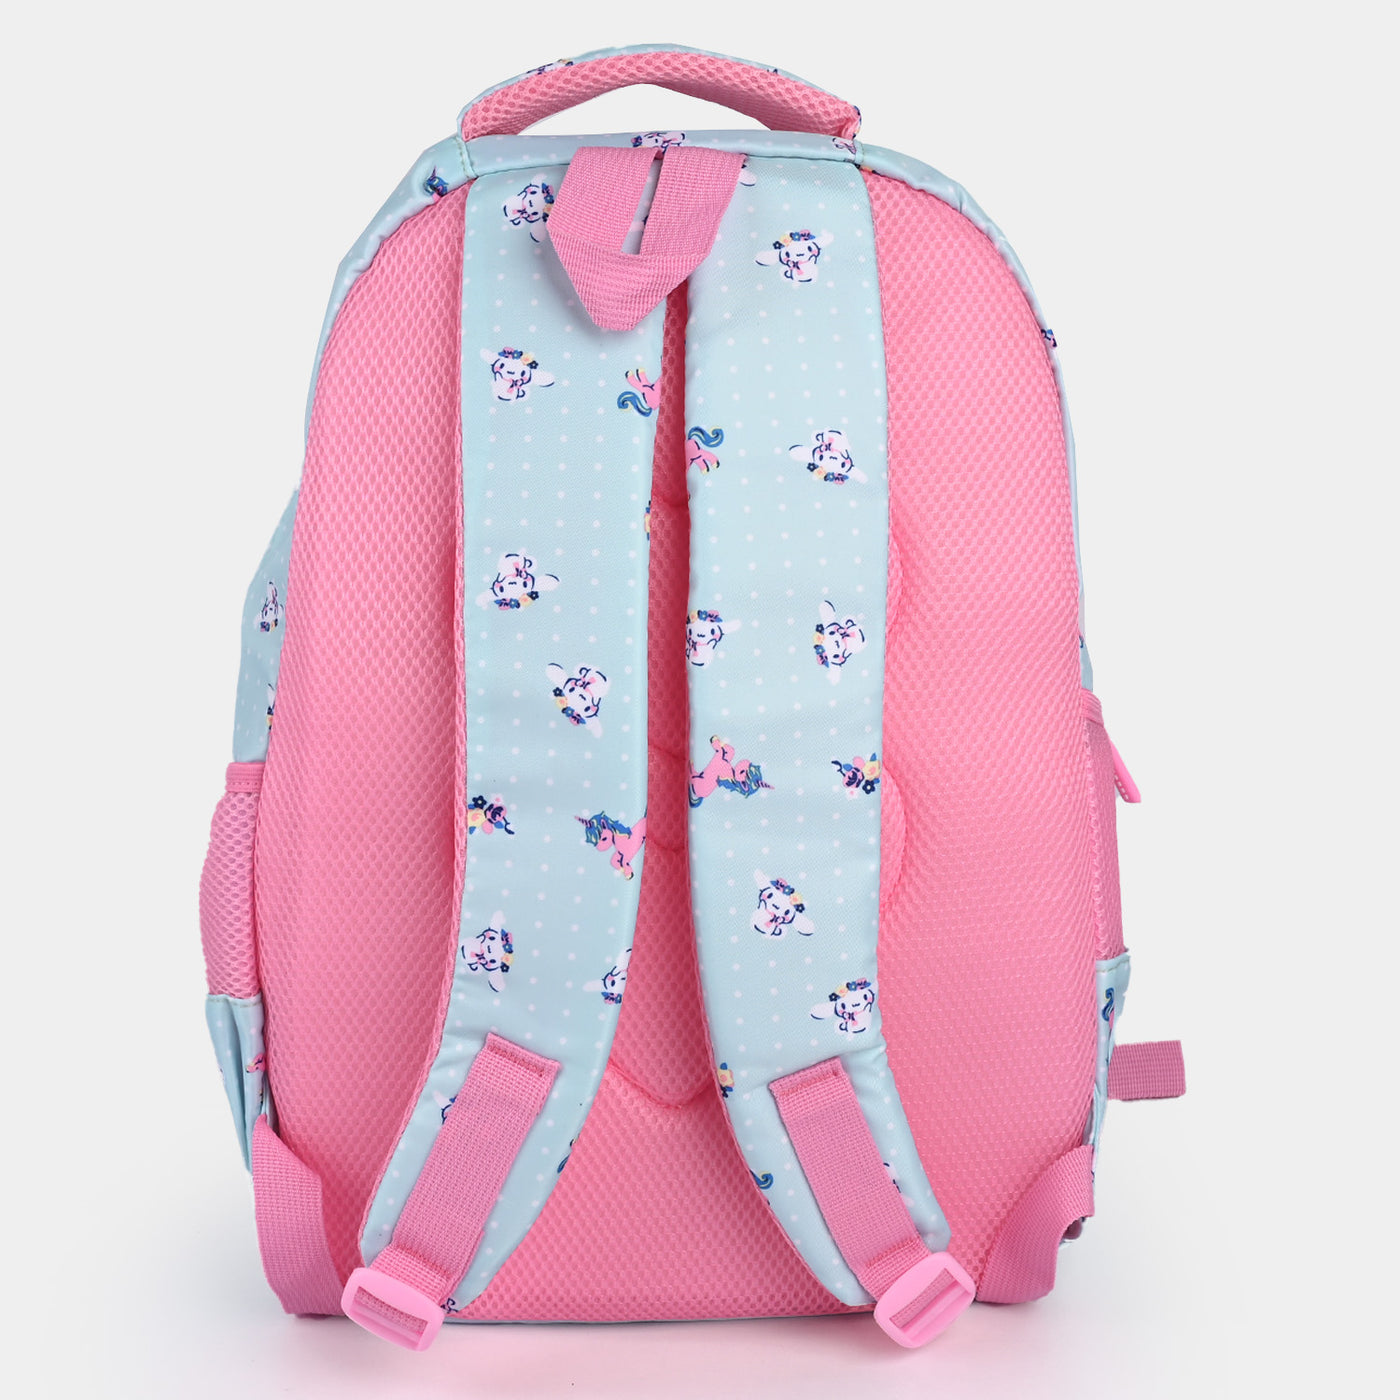 Cute Design School Bag With Pouch For Kids